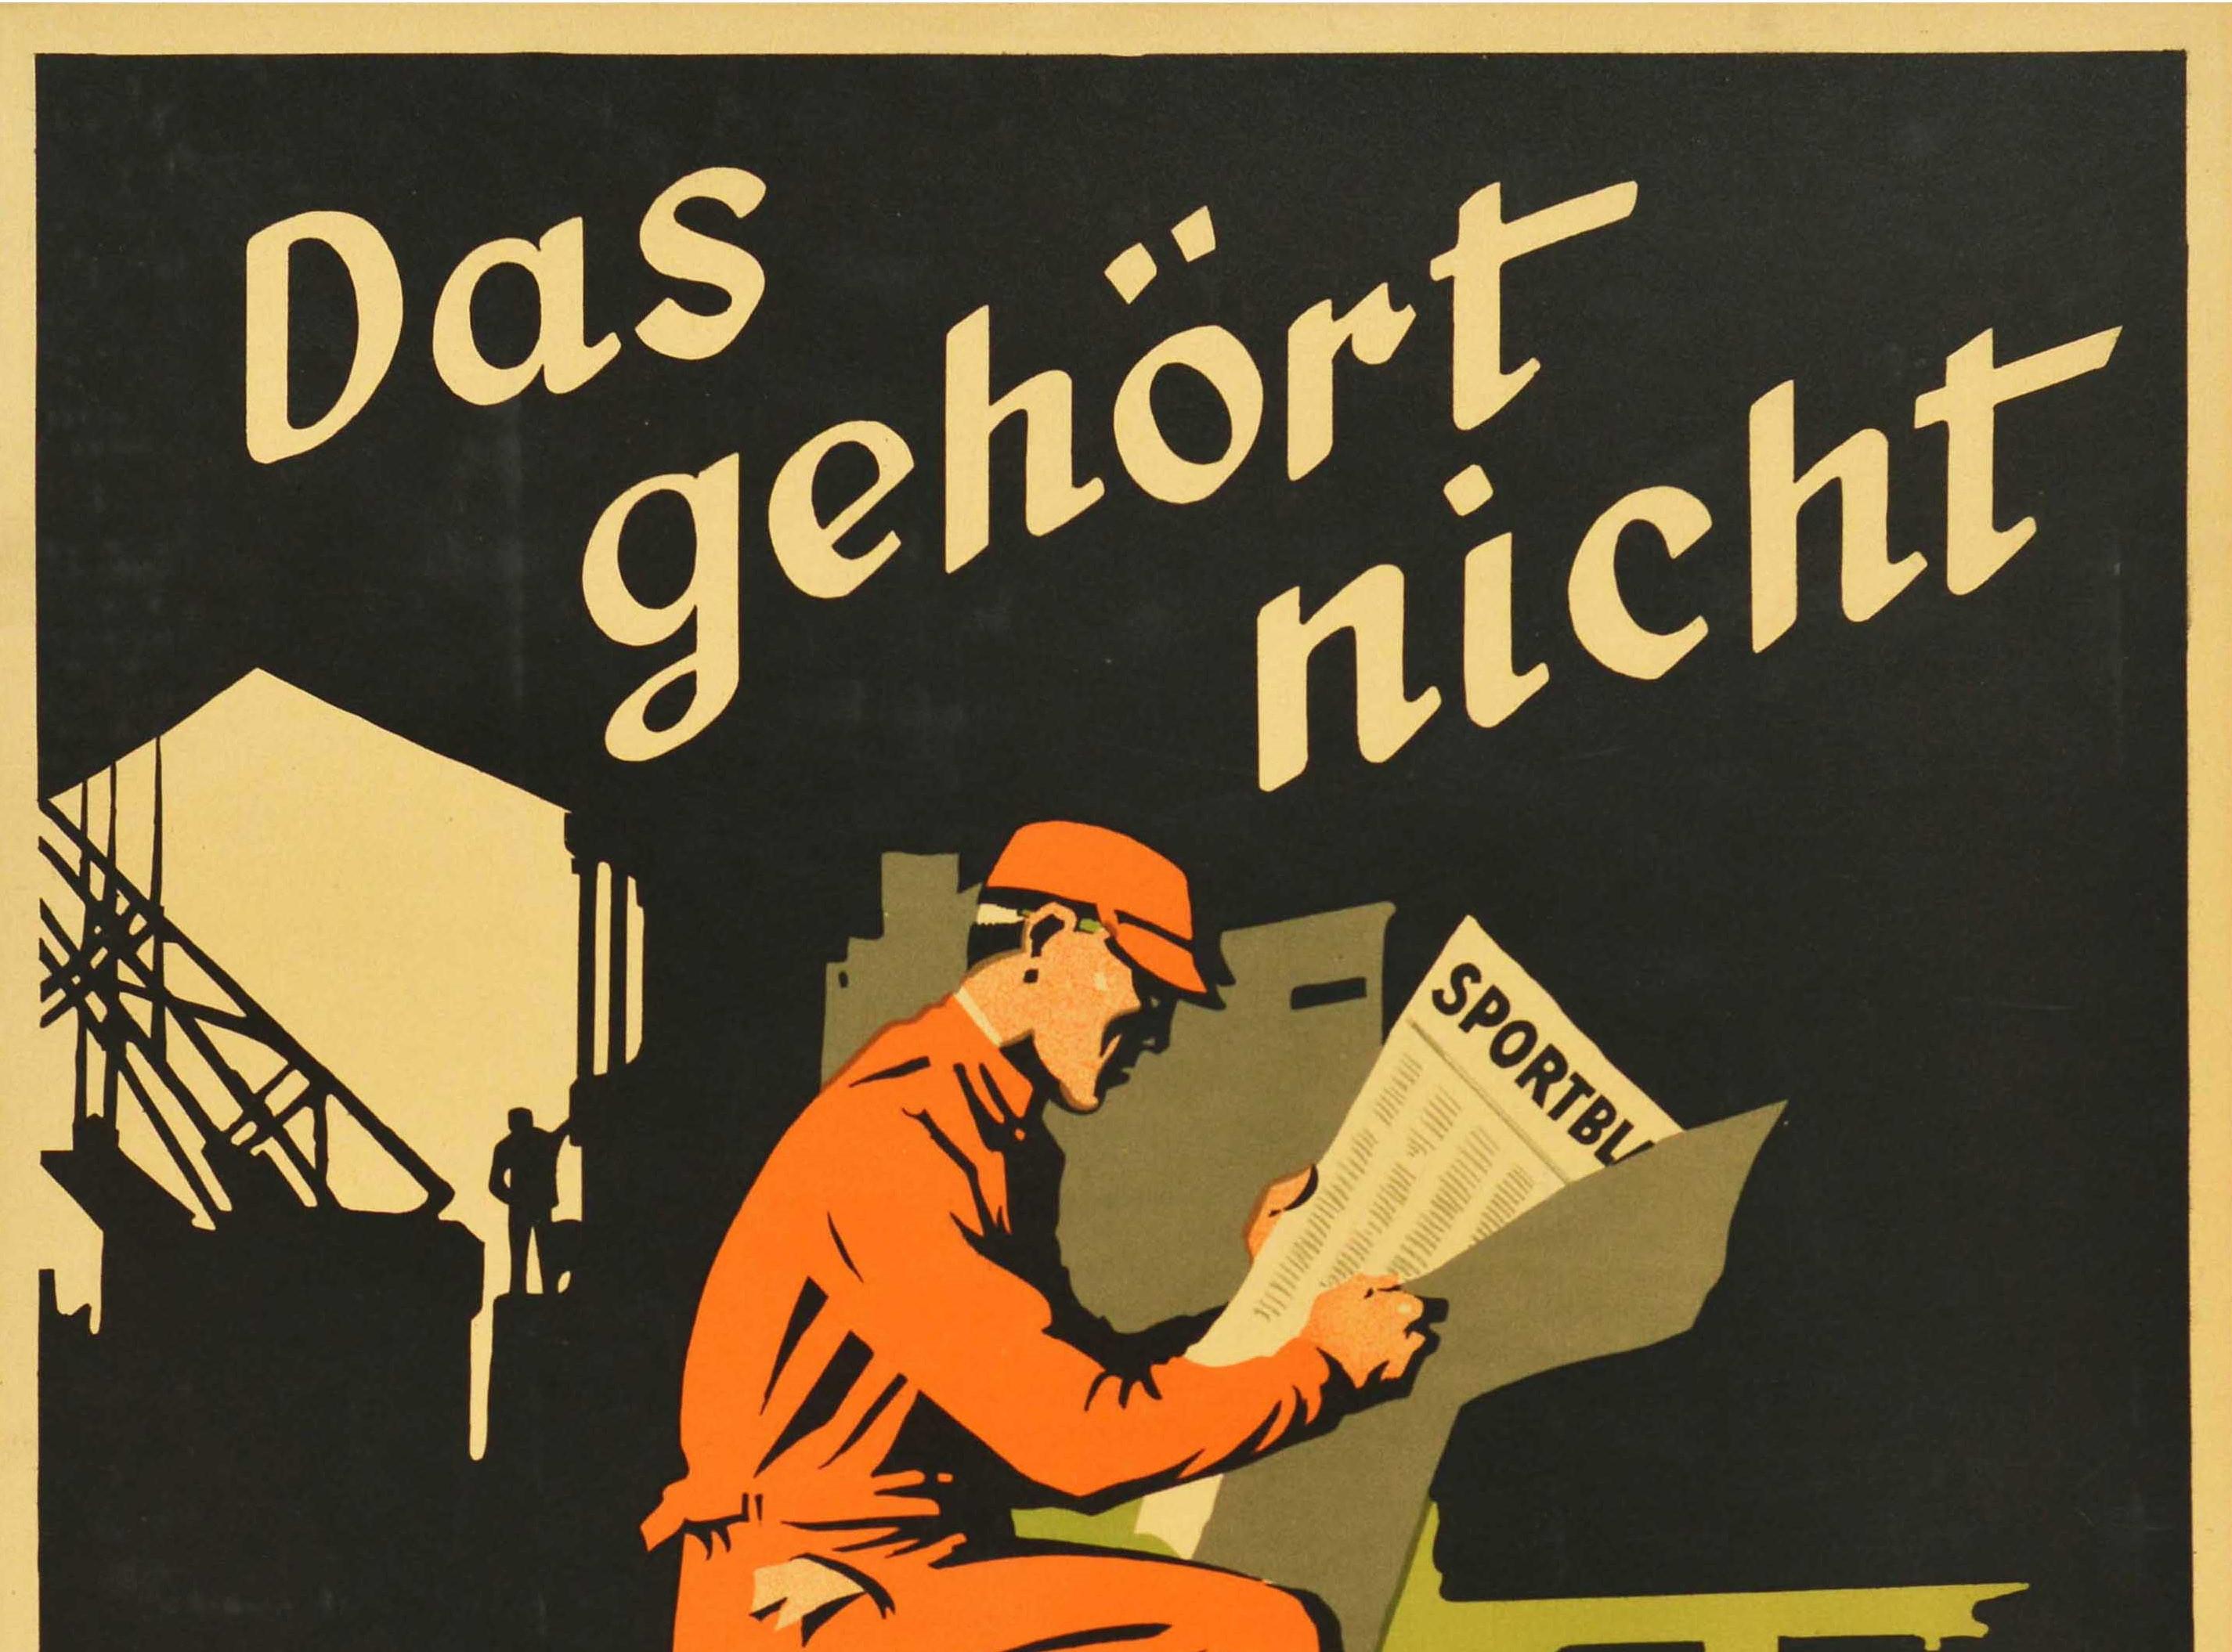 Original vintage German motivational workplace poster issued by the Parker-Holladay company in Berlin featuring an illustration of a worker reading the sports pages of a newspaper in an industrial factory with the quote on the black background - Das